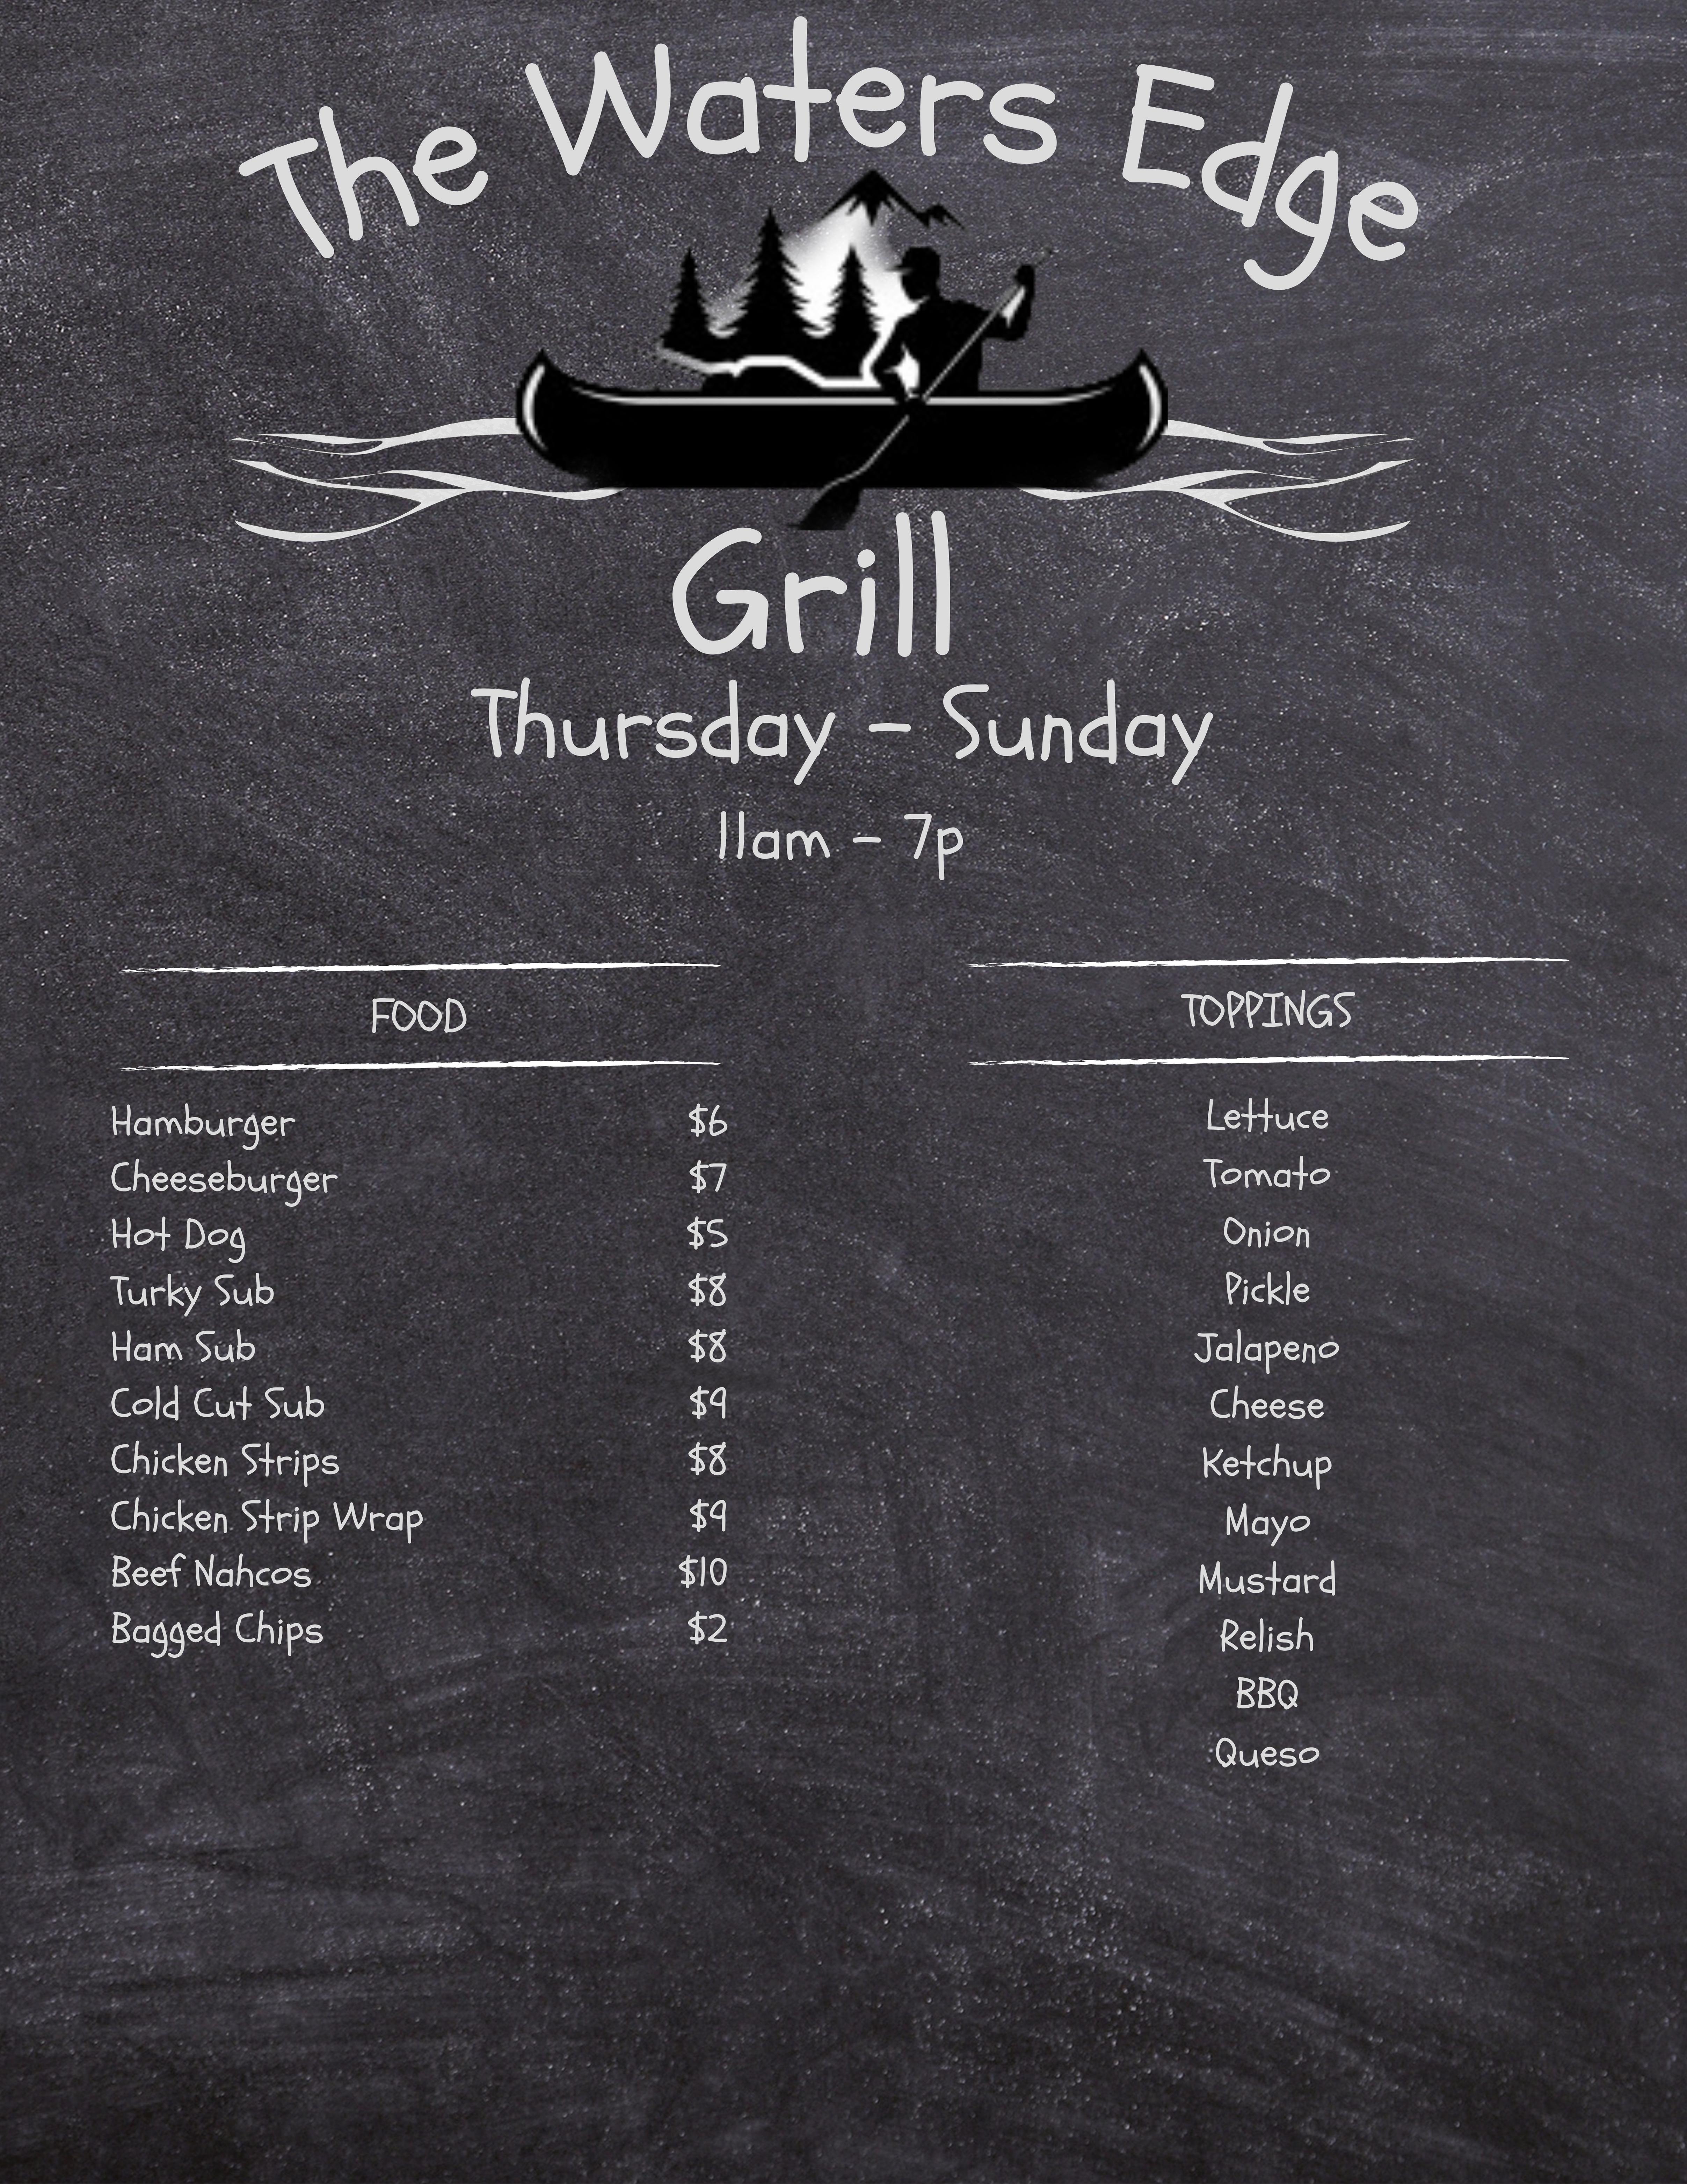 The Water's Edge Grill Menu